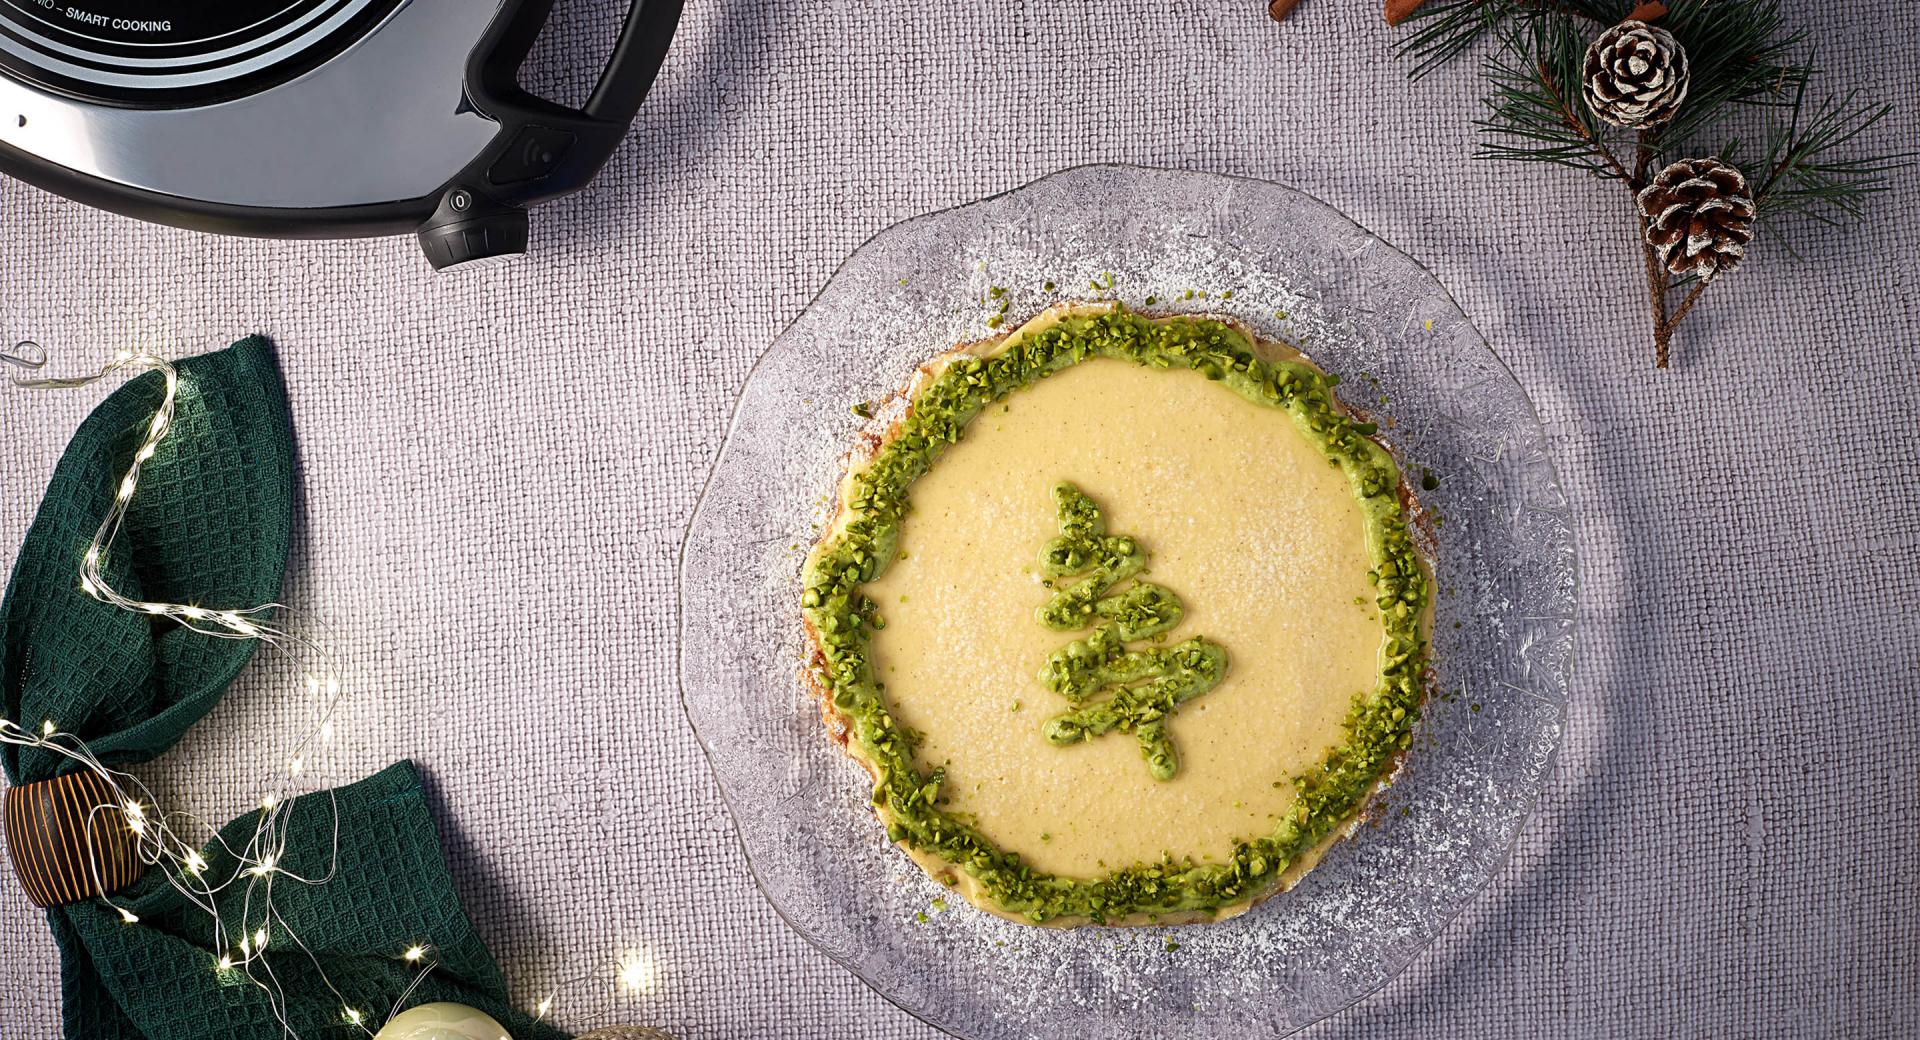 White Chocolate Cheesecake with Pistachios